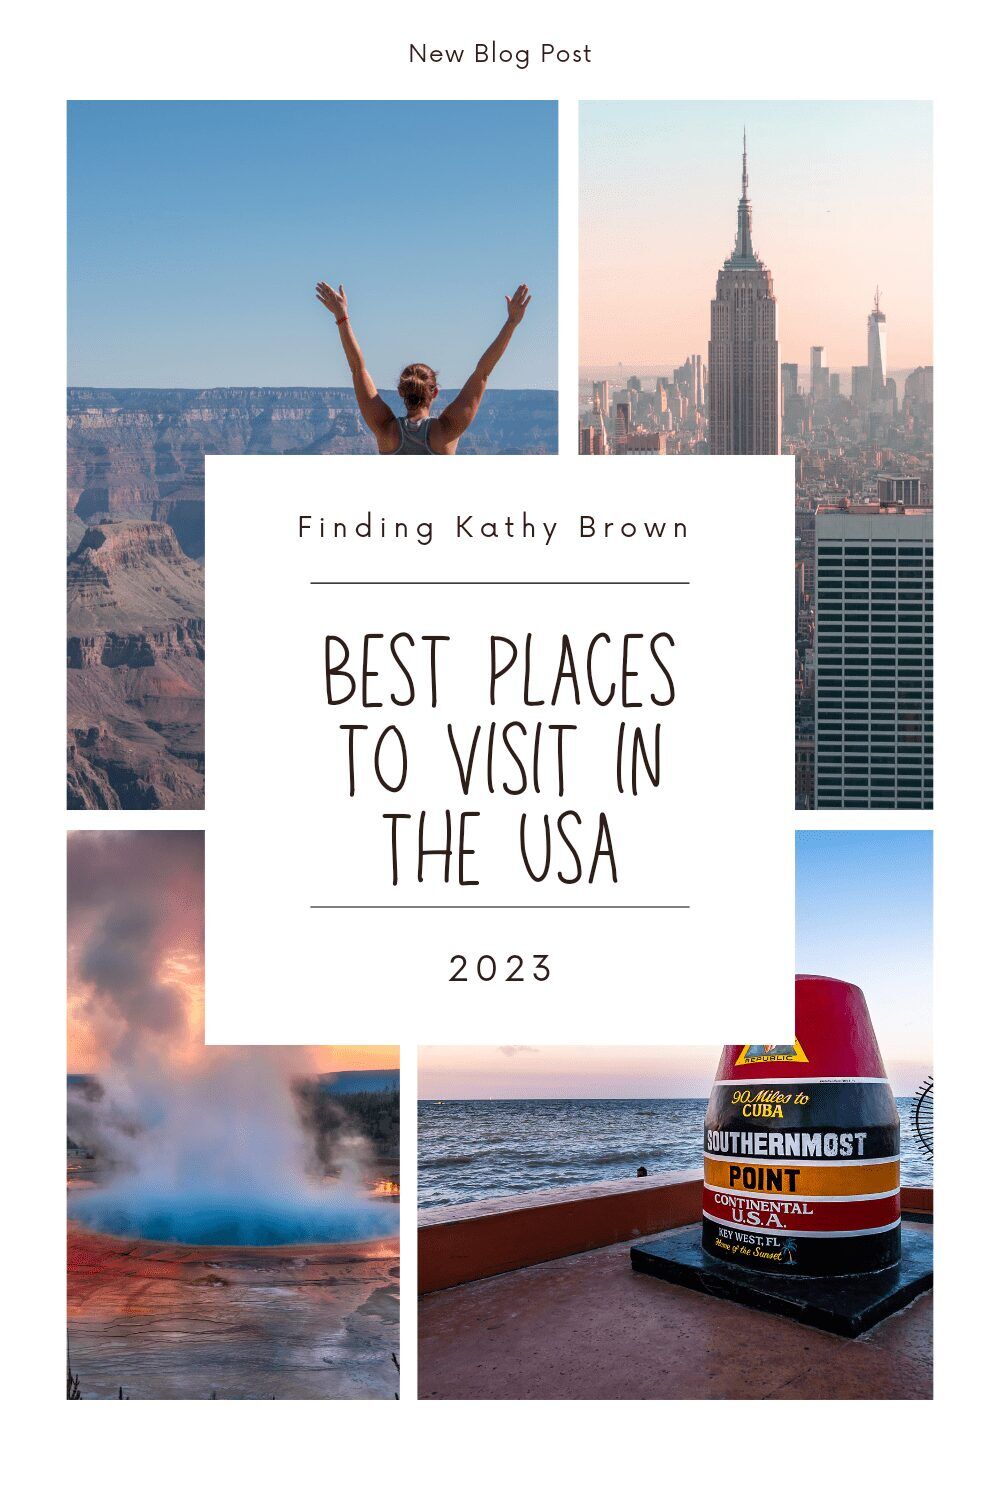 We are exploring, awe-inspiring canyons, beautiful beaches, exciting urban landscapes, and breathtaking hiking trails. Let's go on an unforgettable journey through the United States.